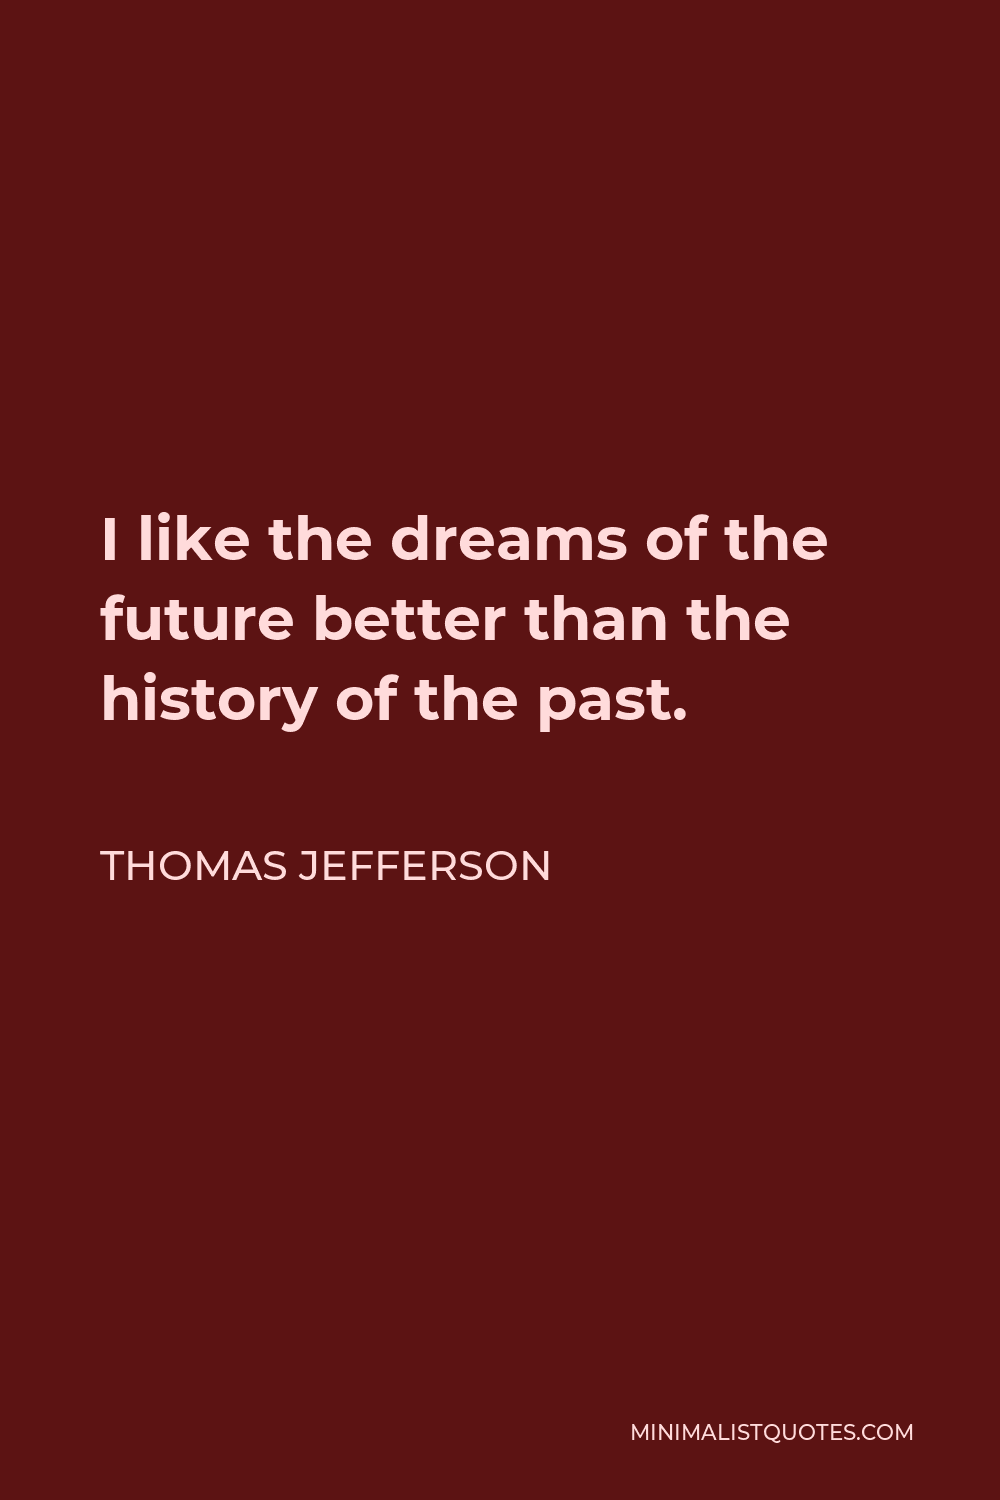 Thomas Jefferson Quote - I like the dreams of the future better than the history of the past.